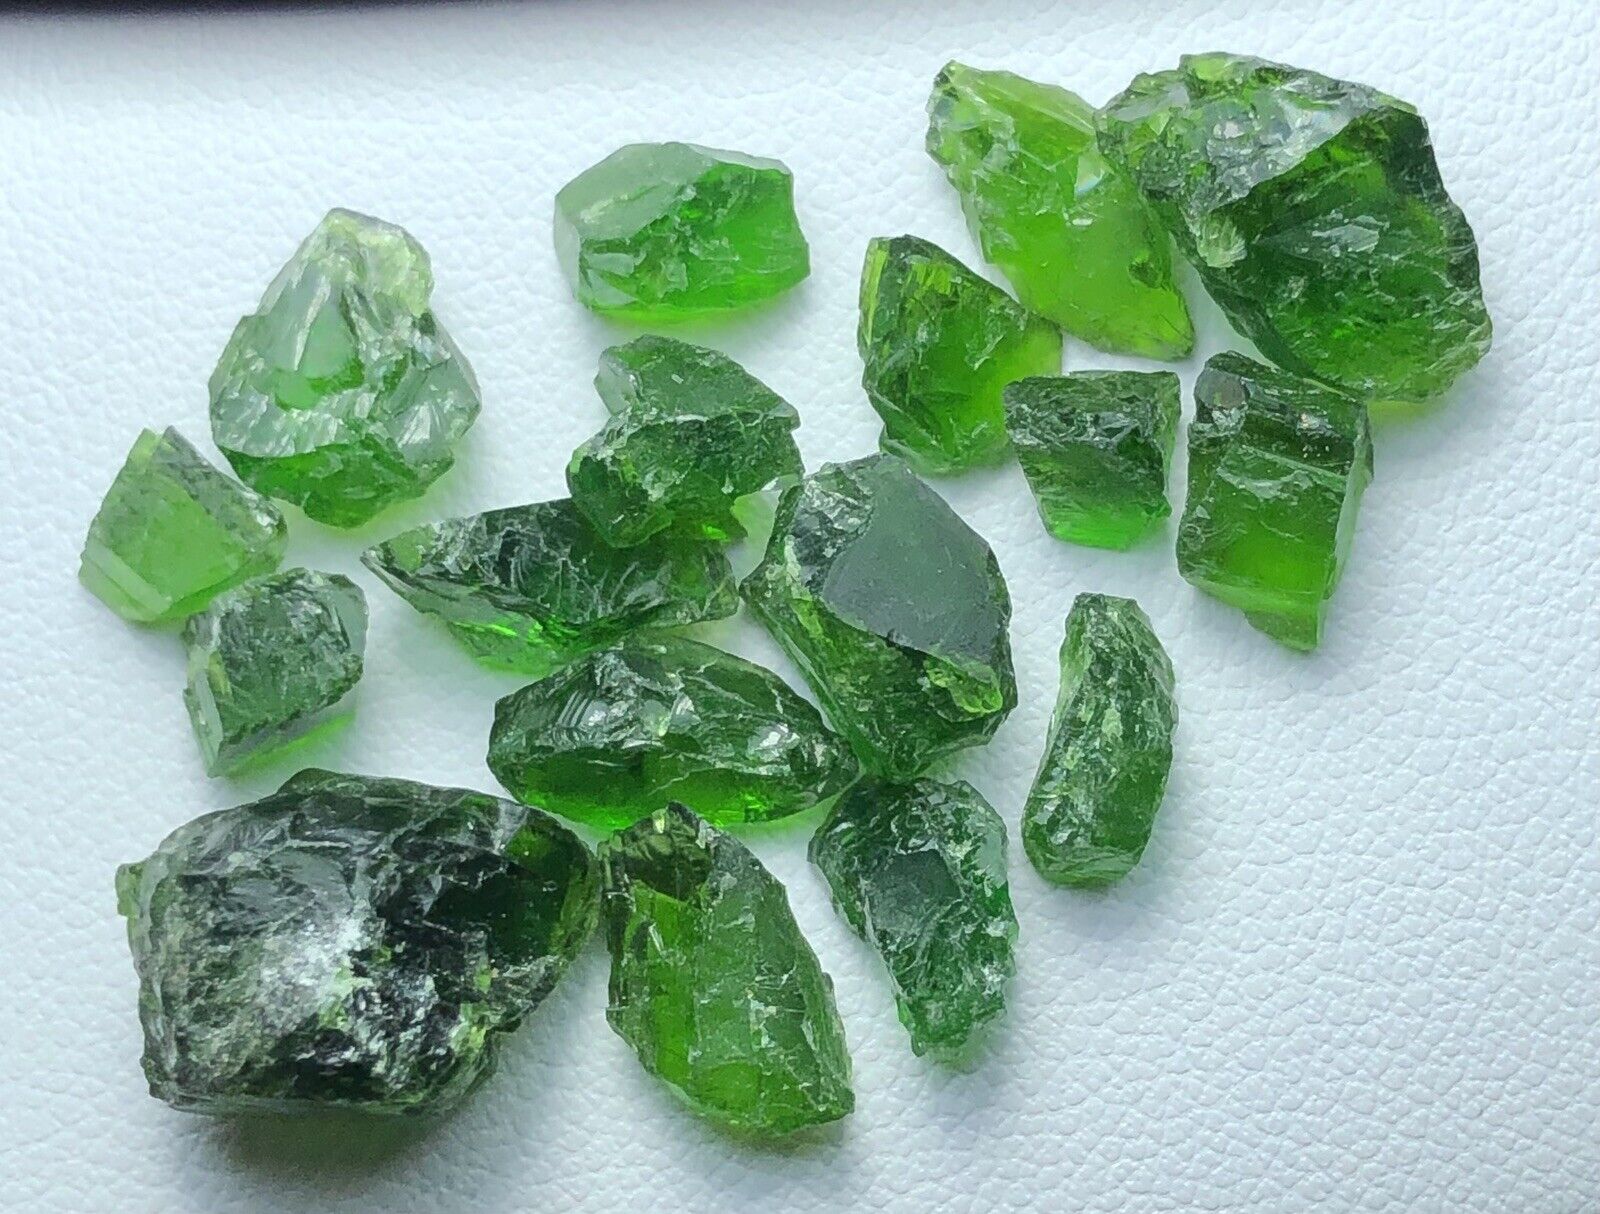 39 Crt / Beautiful Natural Rough Chrom Diopsid Parcel,